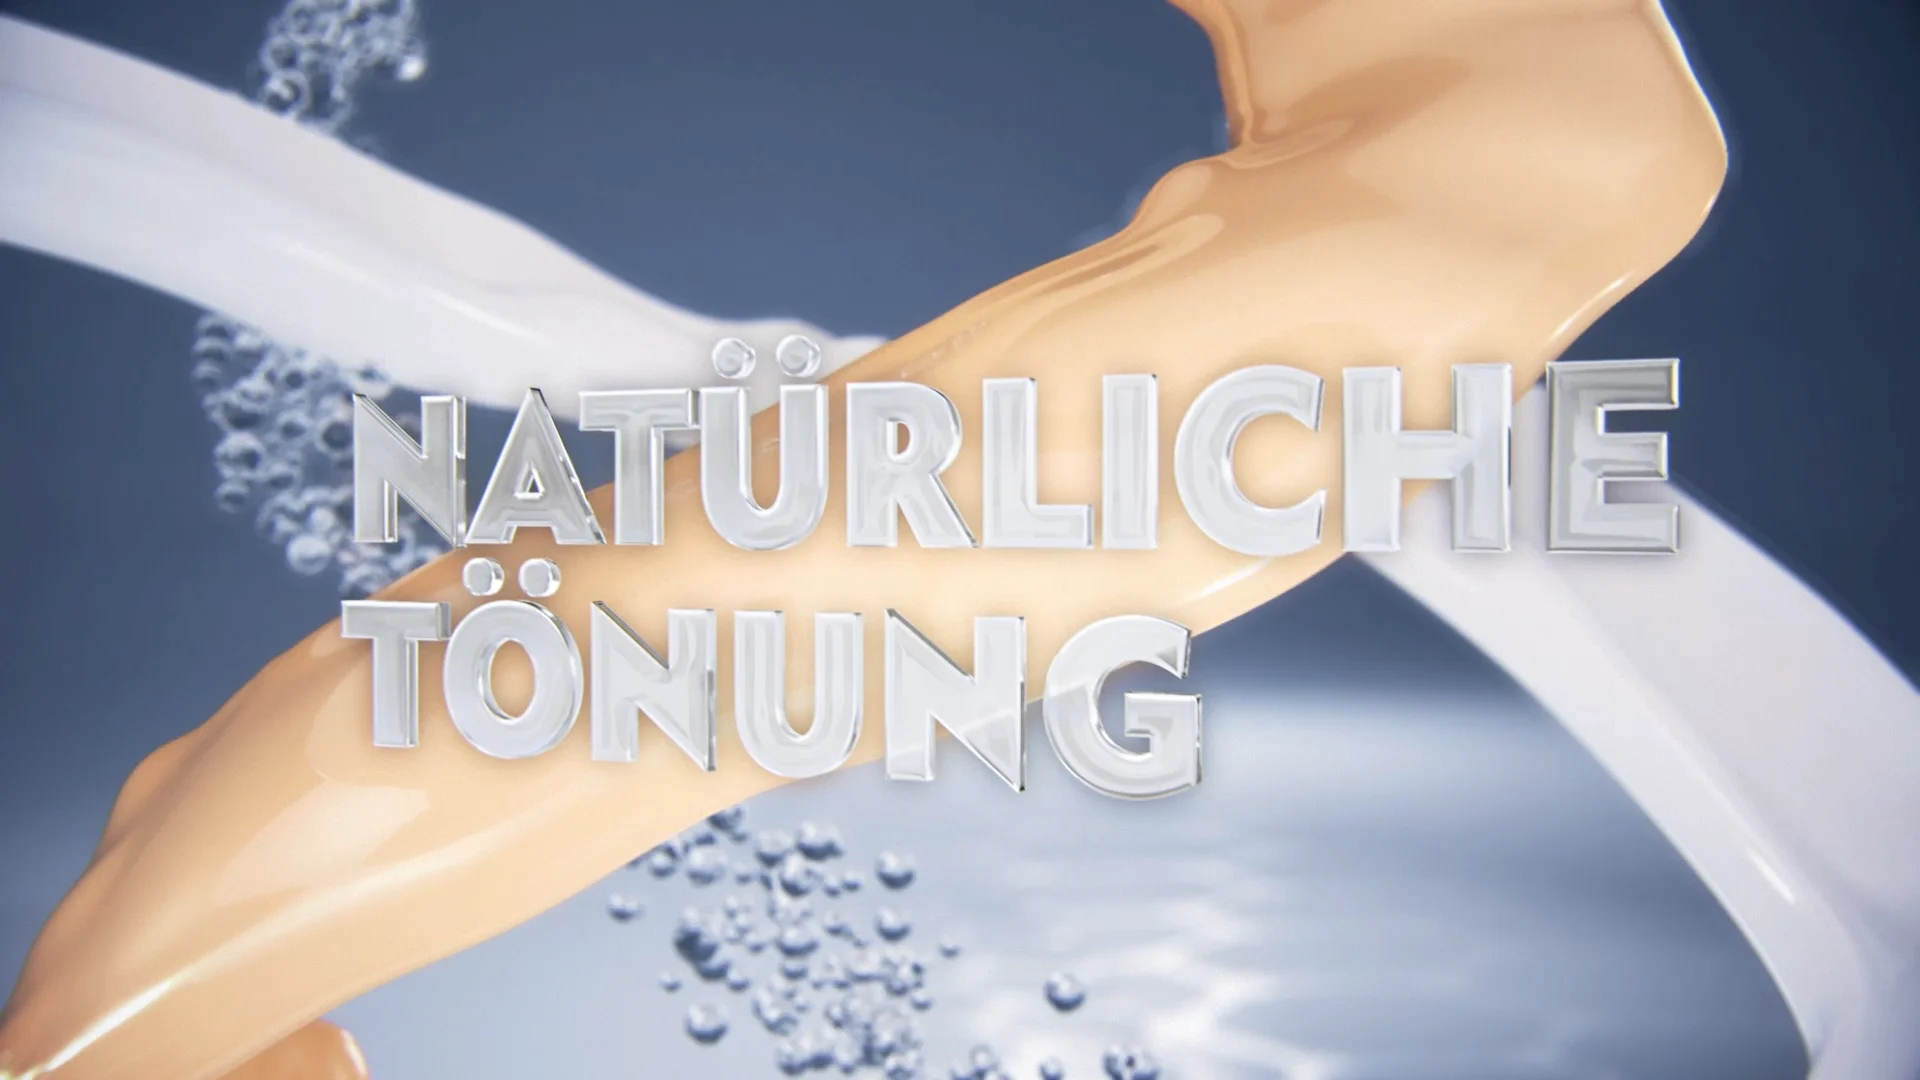 close up of ingredients. a brown liquid, a white liquid and blueish bubbles behind the words NATÜRLICHE TÖNUNG